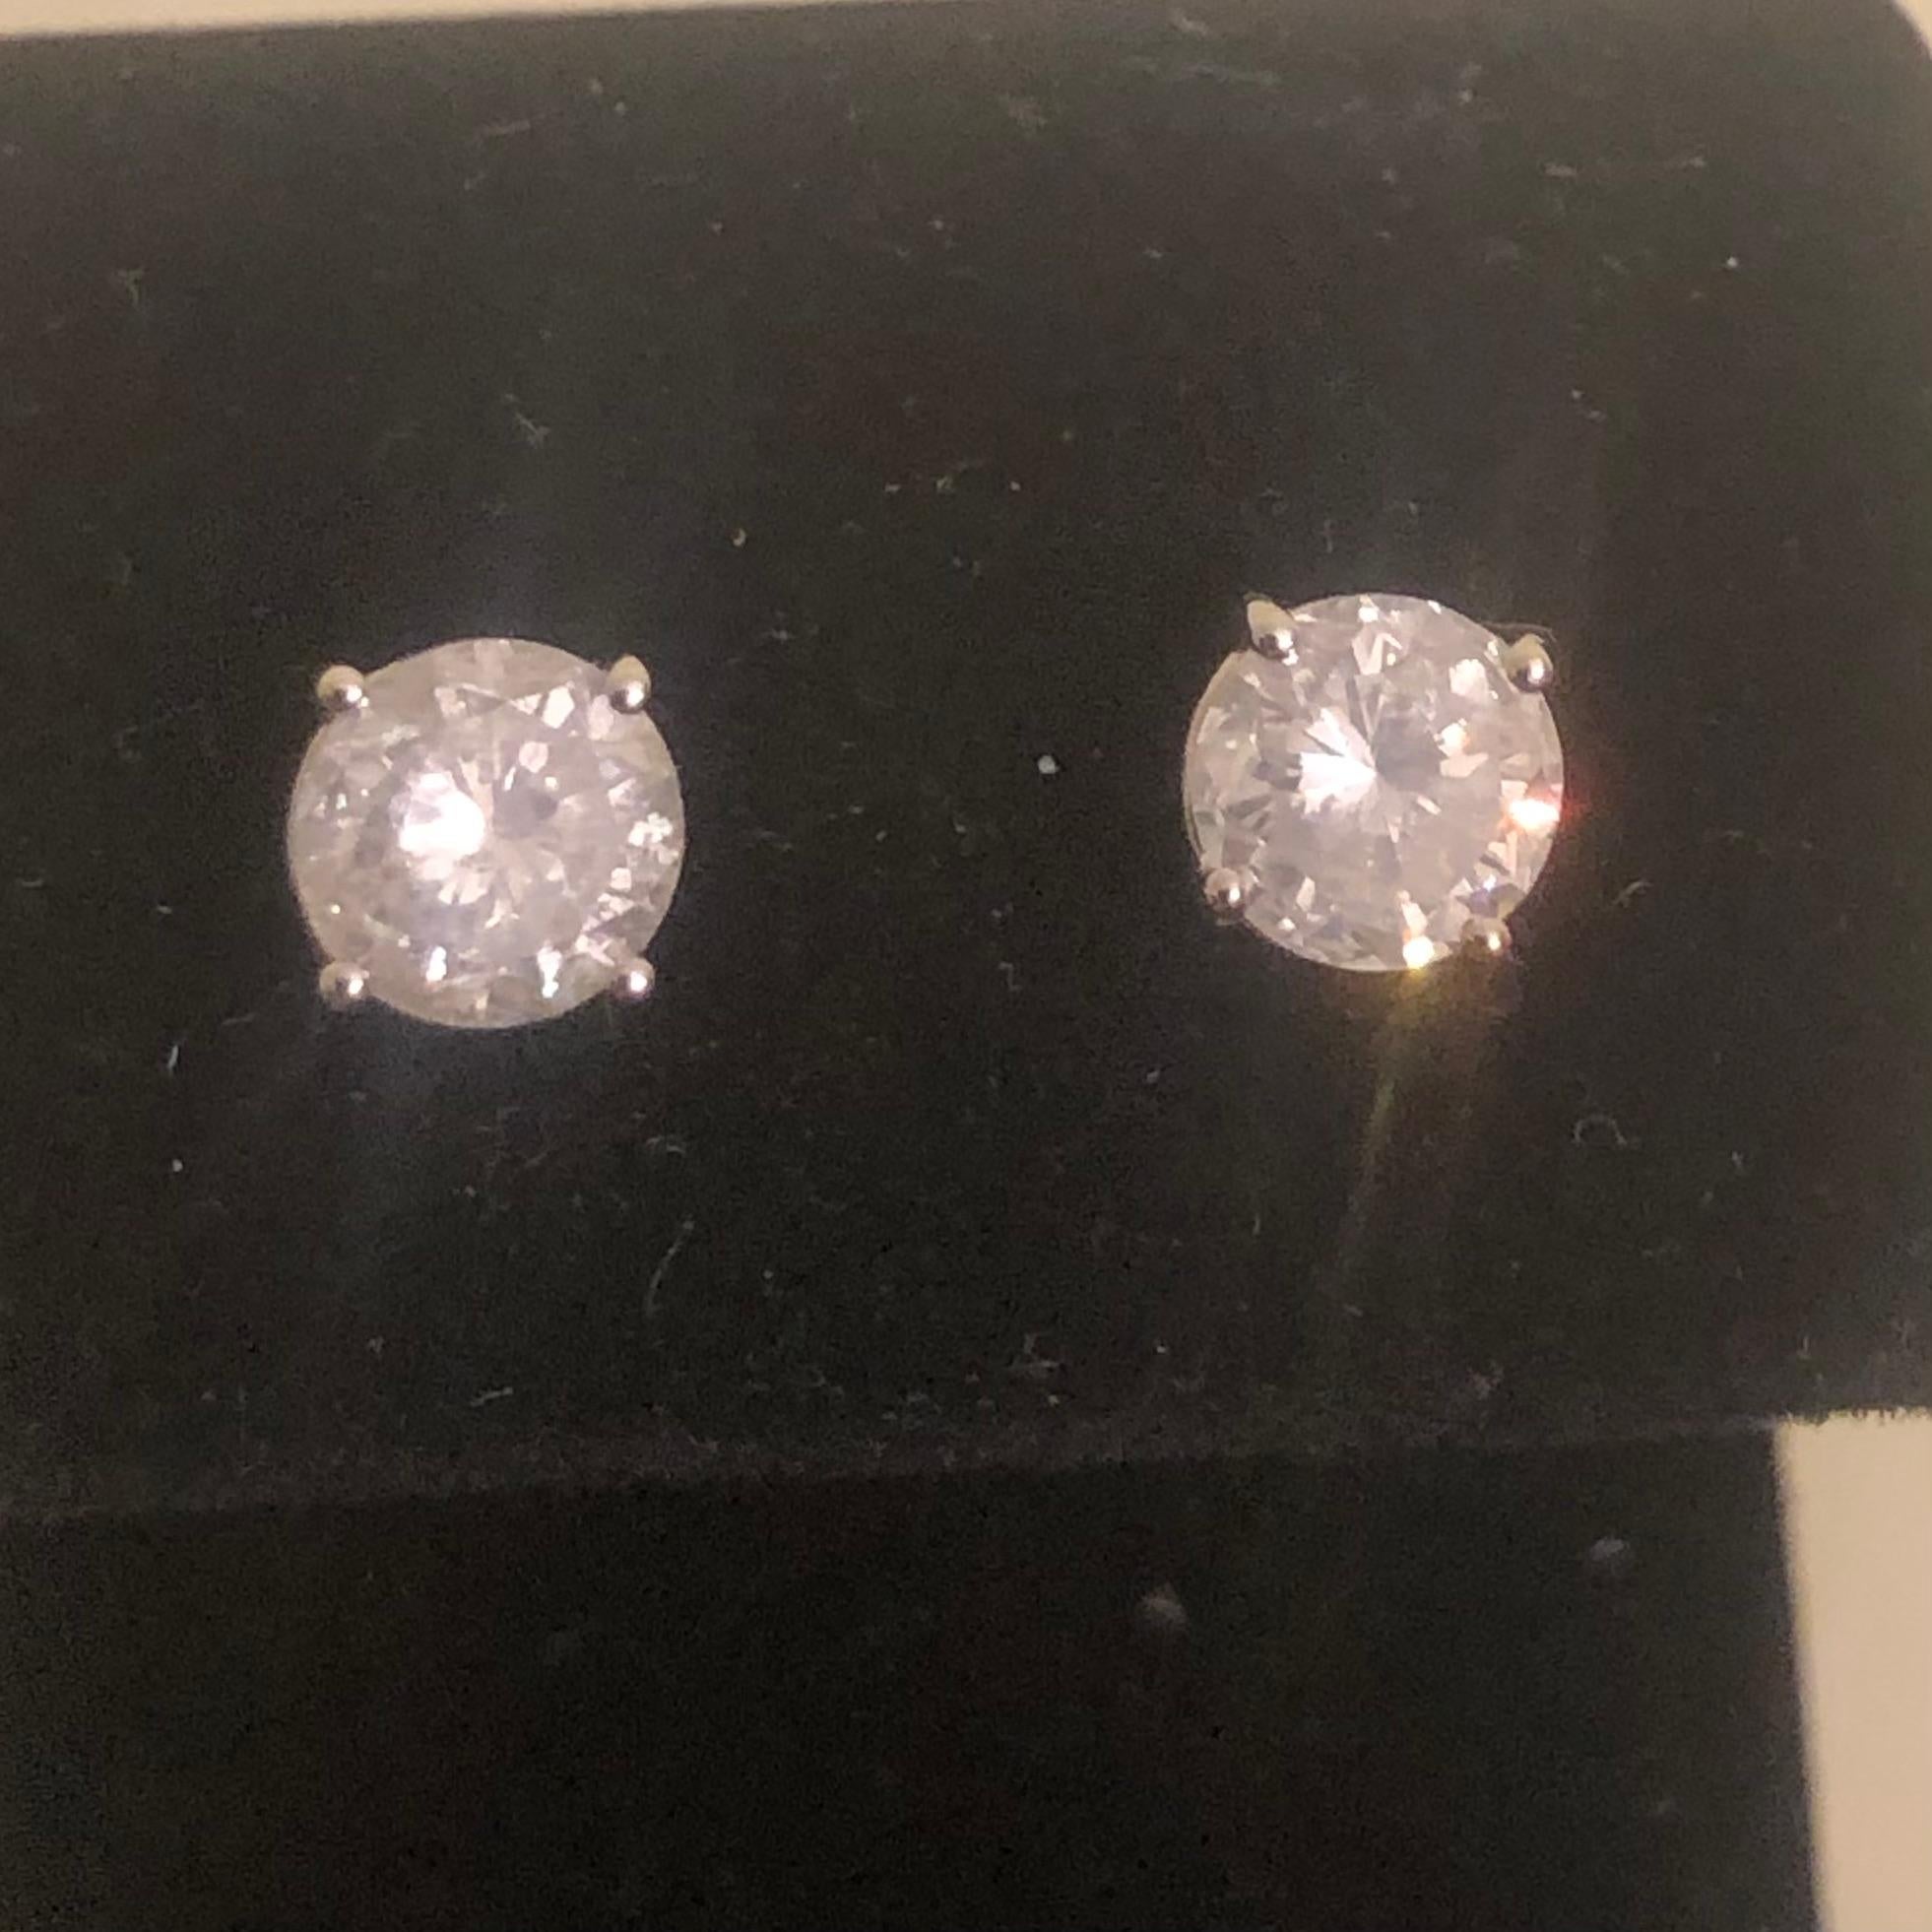 Stunning 2 Ct Brilliant Round Solitaire Diamond Stud Earrings in 14K White Gold. These natural diamond studs are certified with an appraisal report value of $8,850.00.

A large center 1 carat plus solitaire diamond (size of an engagement ring) is